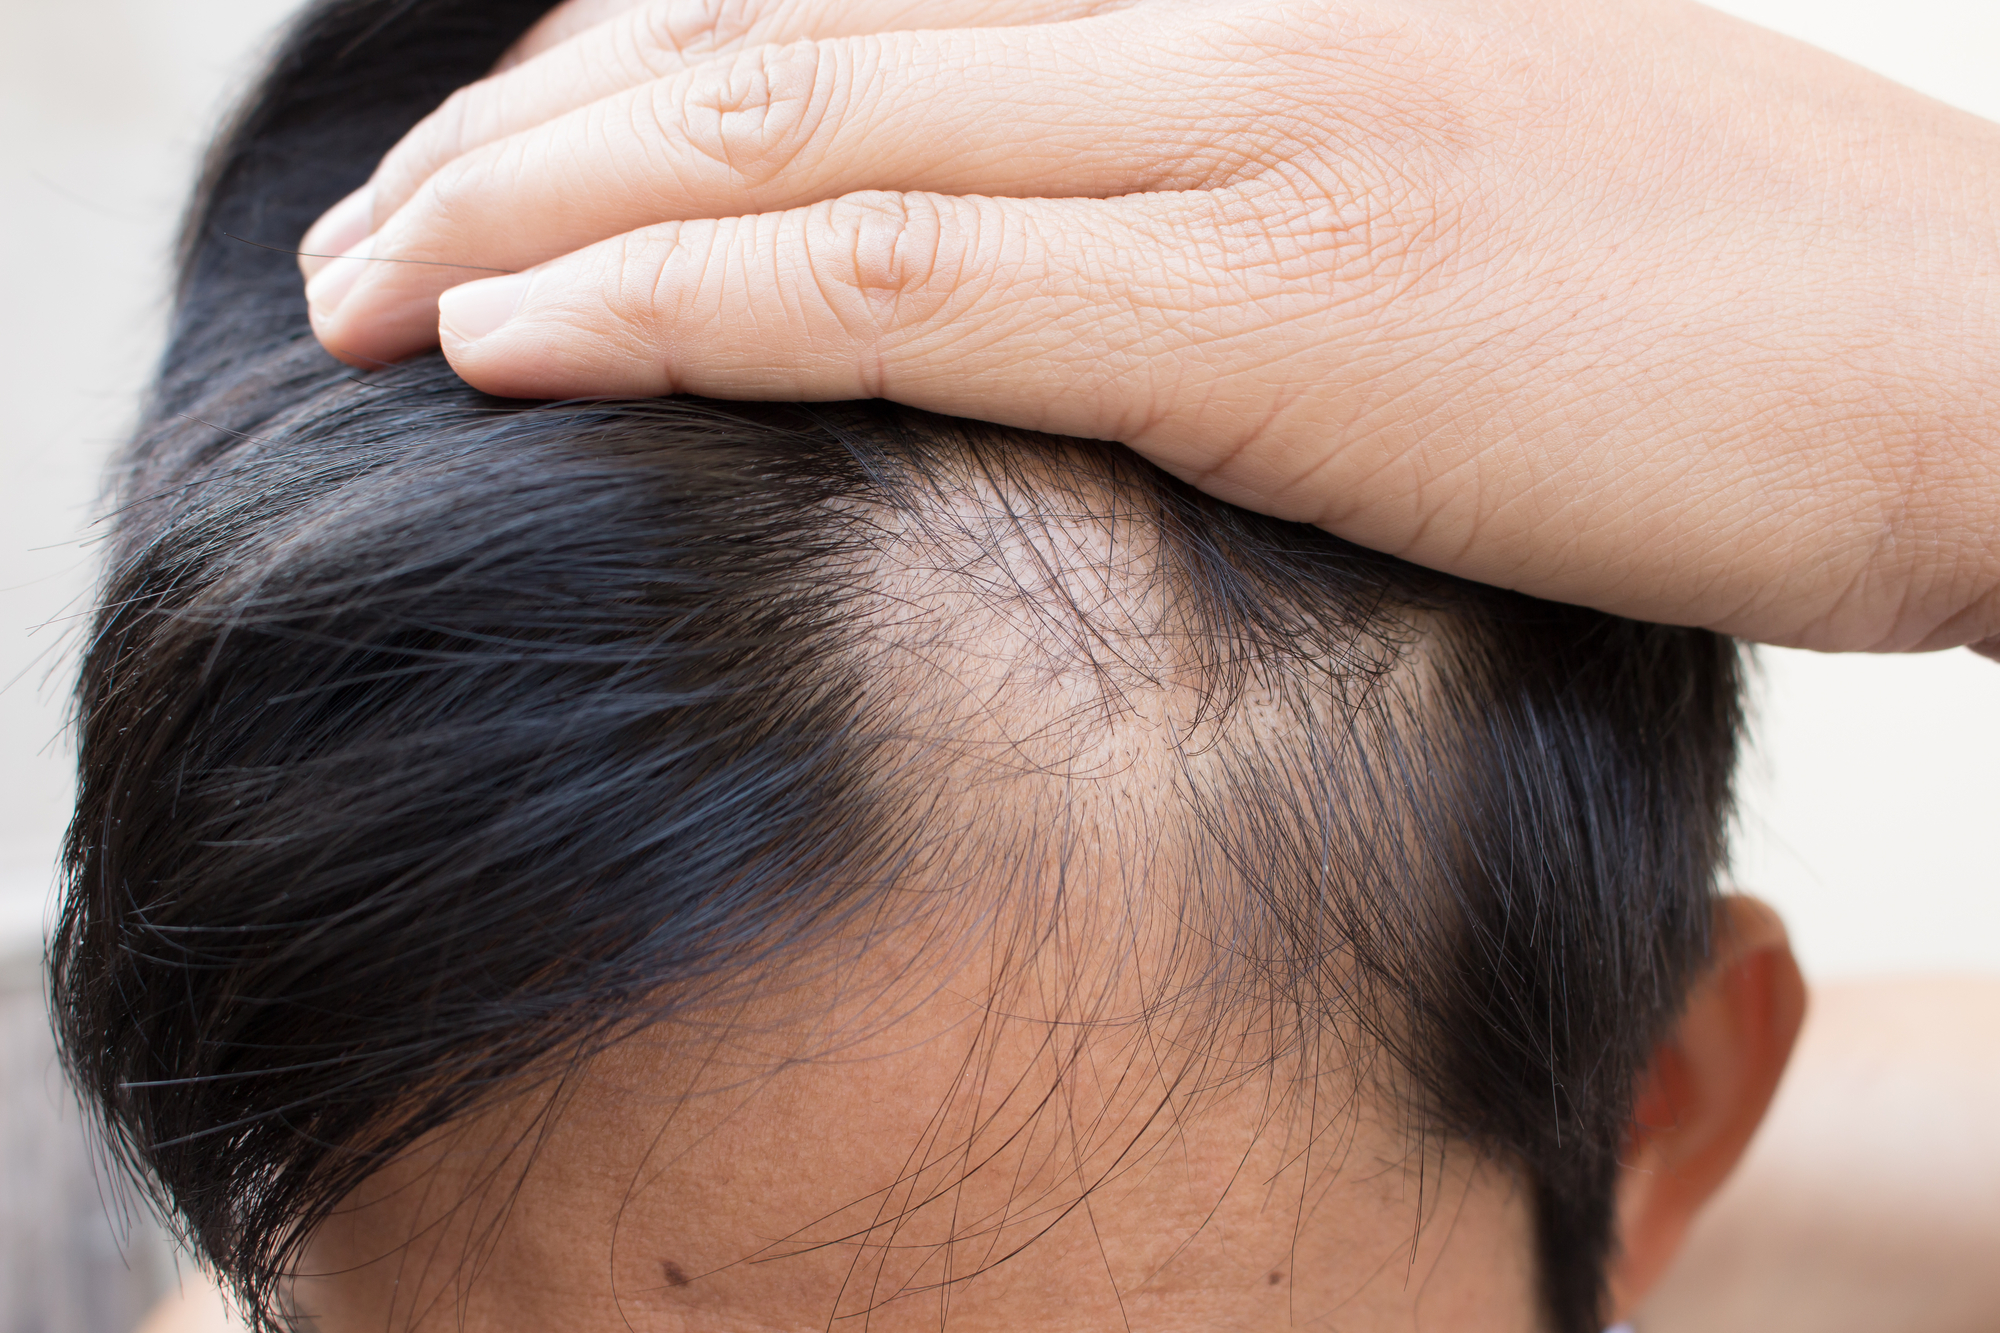 Alopecia patients finally have an FDA-approved hair-loss treatment